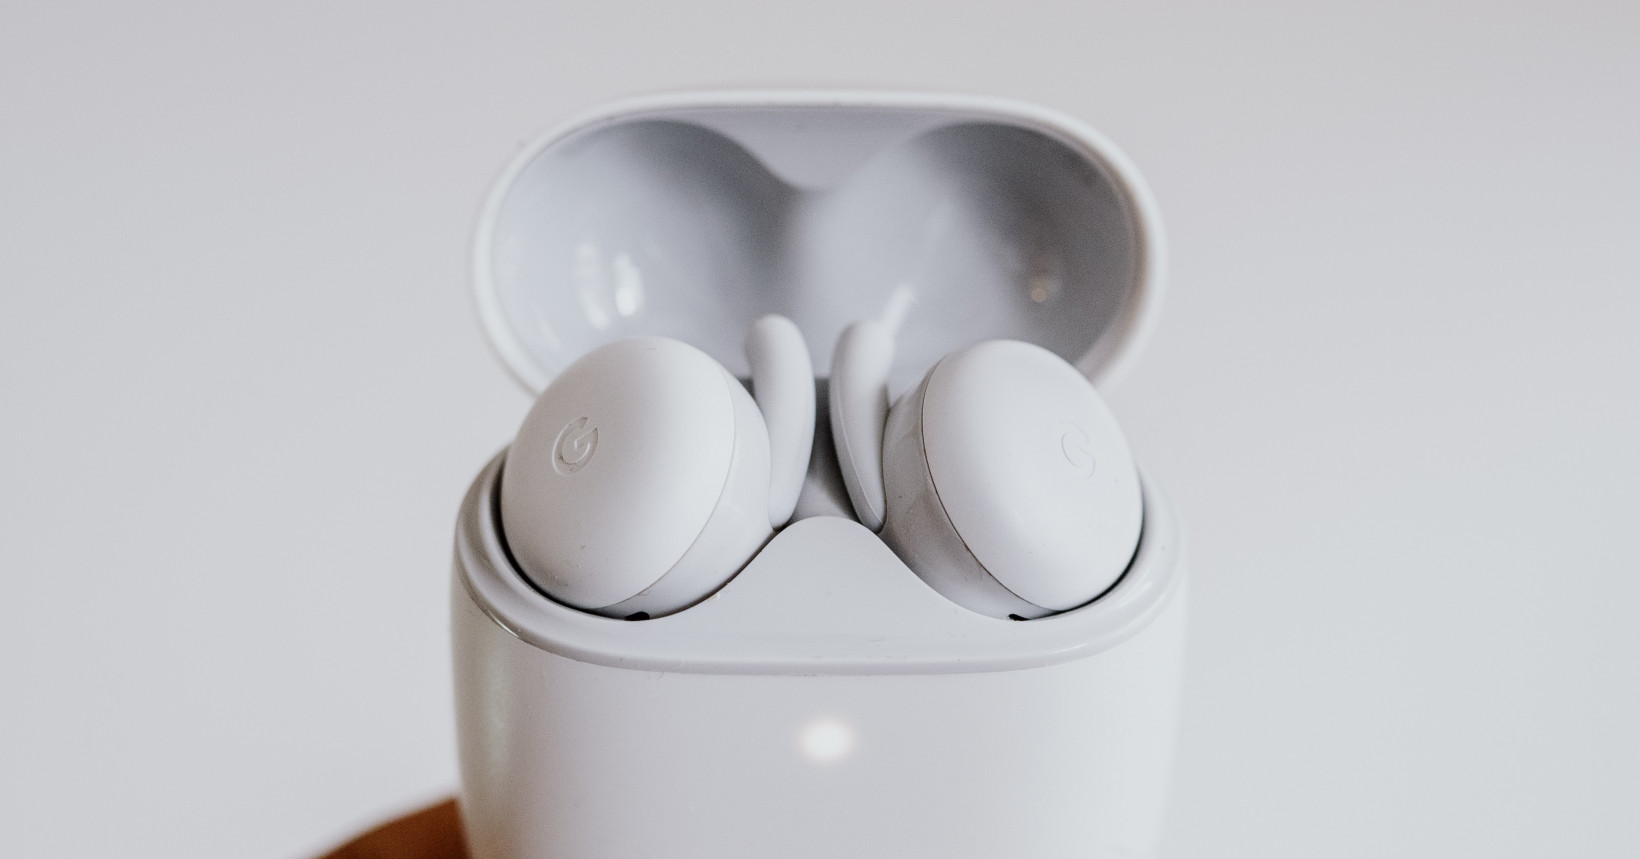 Pixel Buds A-Series in white color